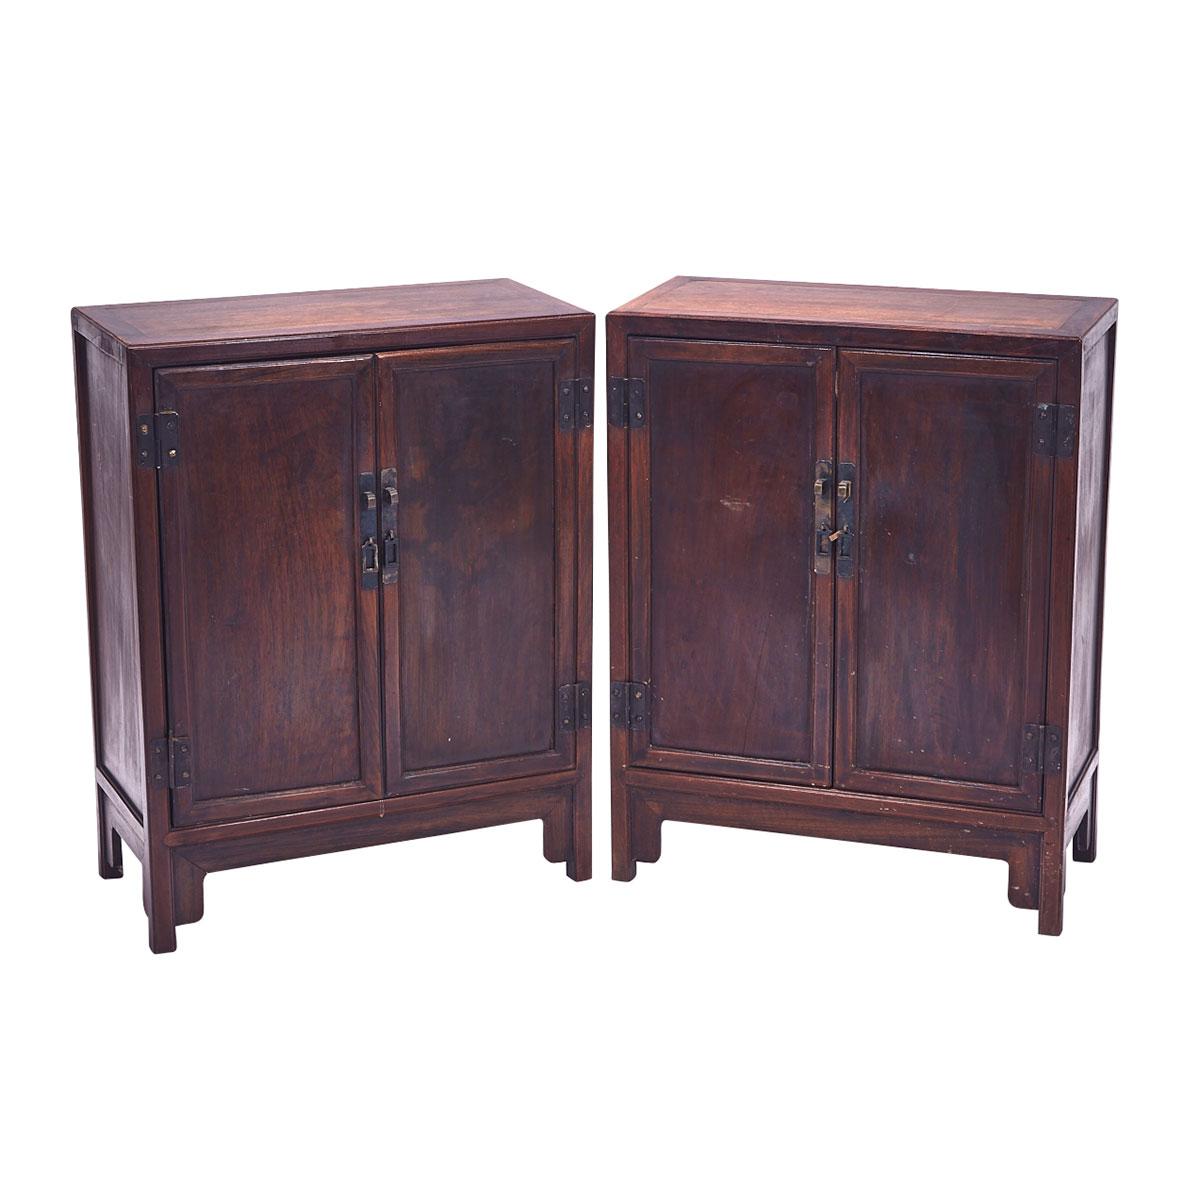 Pair of Huanghuali and Mixed-Hardwood Low Cabinets, Late Qing Dynasty